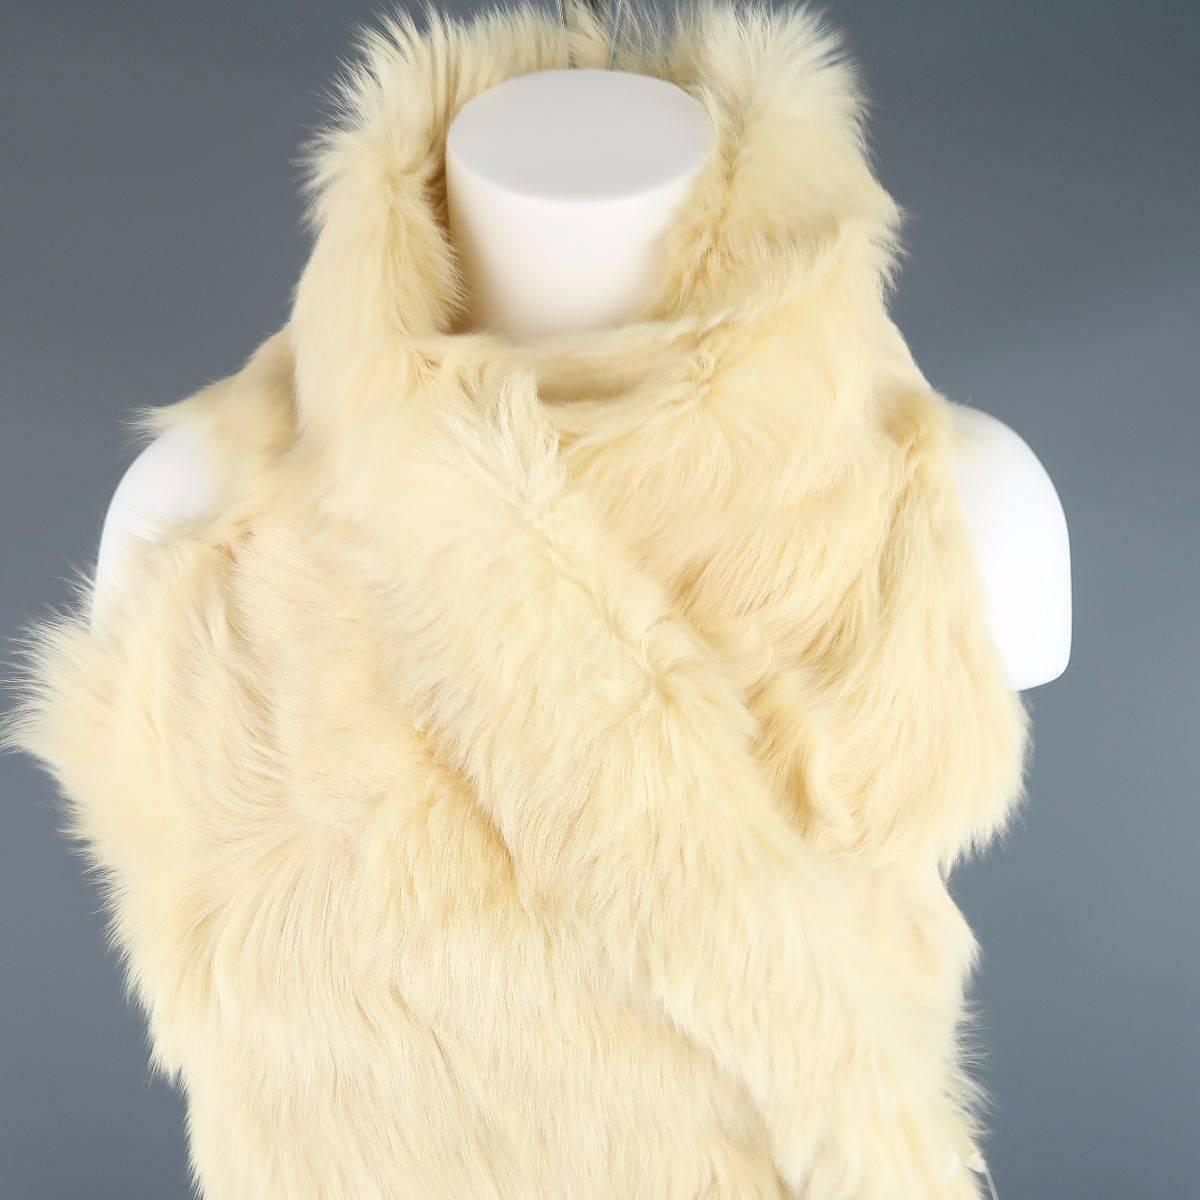 Gorgeous ANN DEMEULEMEESTER vest comes in a creamy beige fur shearling leather and features a folded collar, asymmetrical wrap snap closure, and side ties. Made in Belgium.
 
Excellent Pre-Owned Condition.
Marked: M
 
Measurements:
 
Shoulder: 13